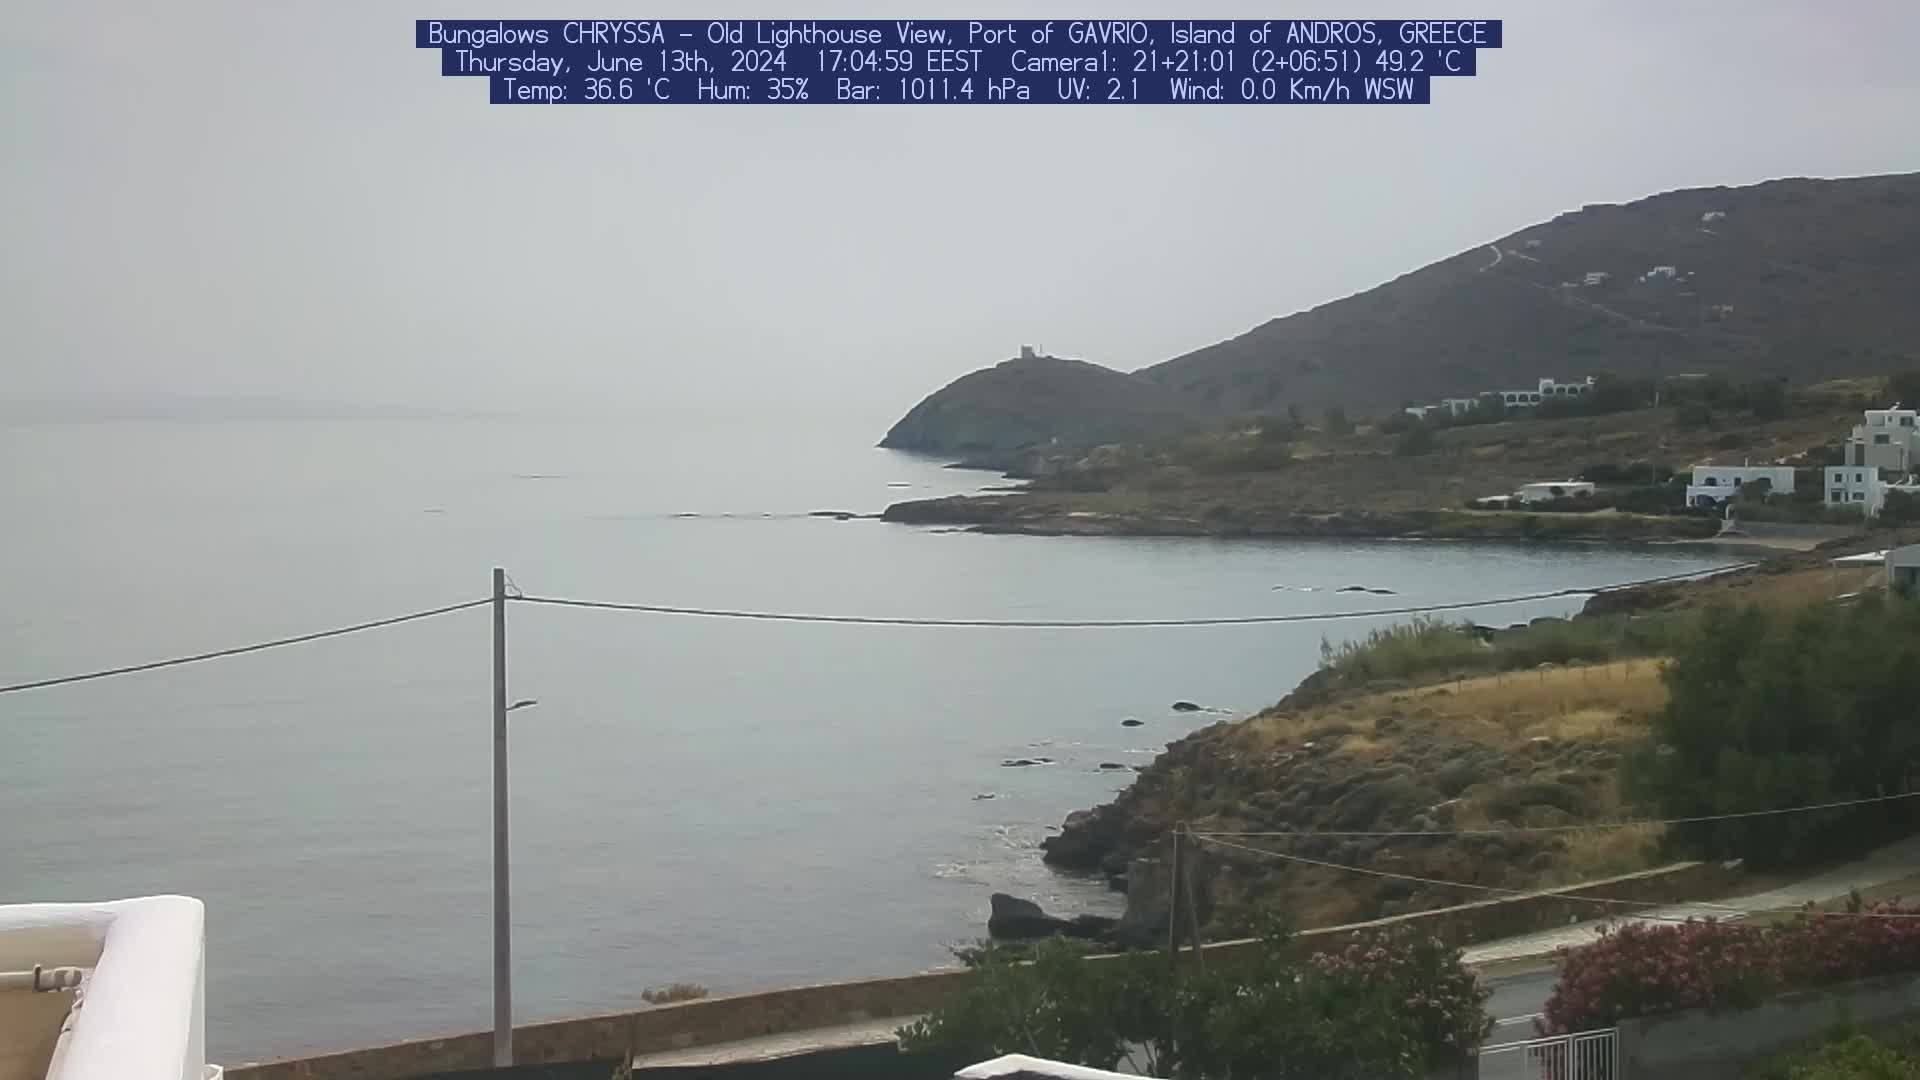 Andros - Gavrion Mar. 17:05